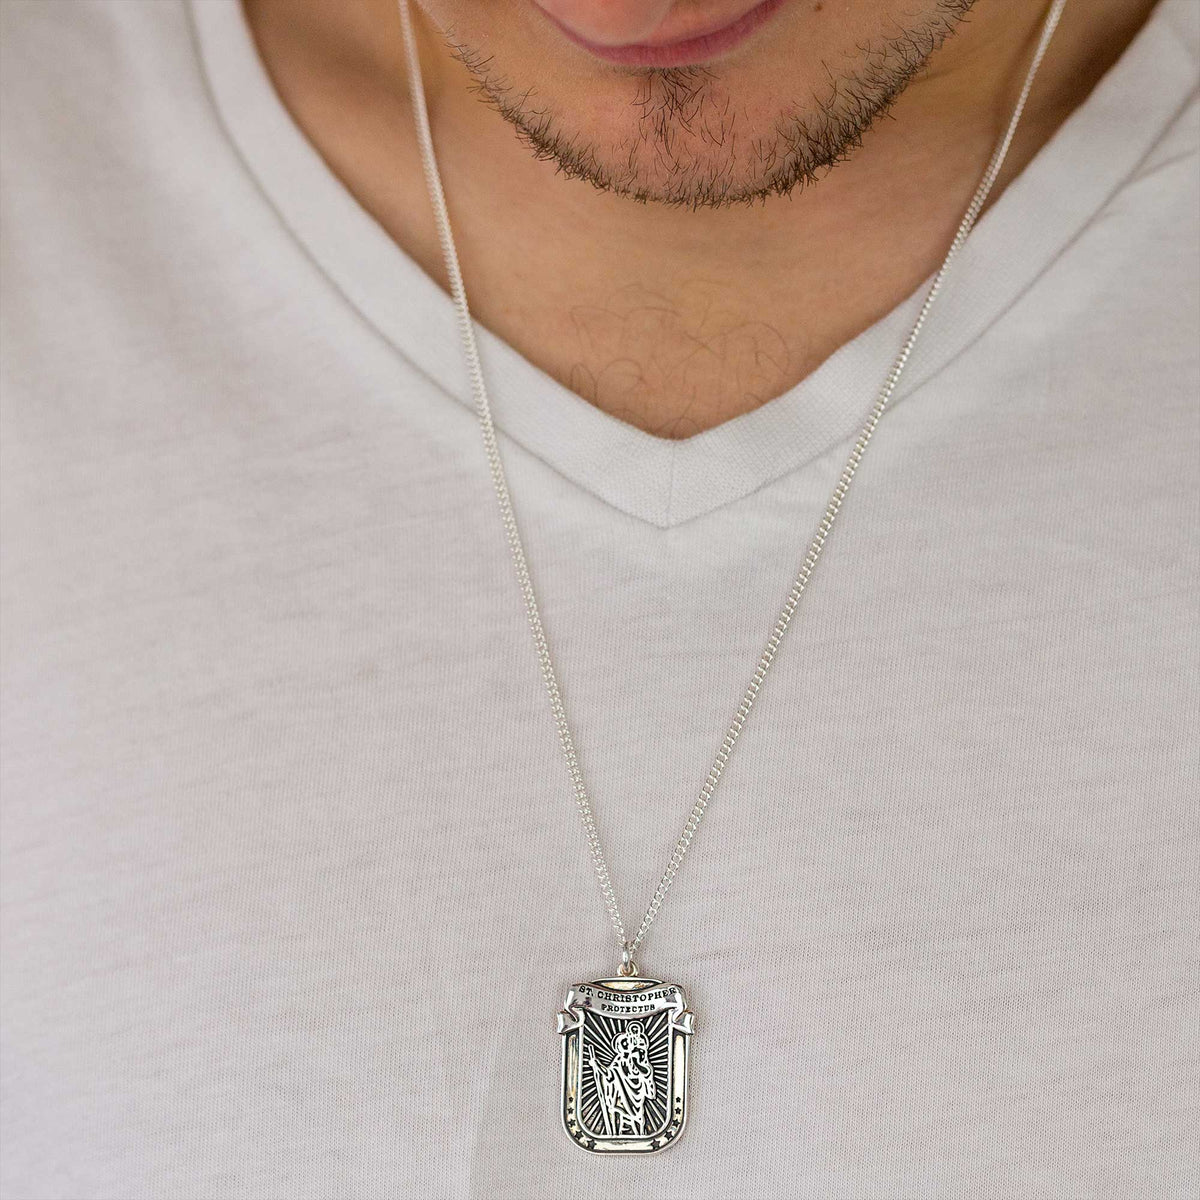 mens silver necklace pendant travel gift going away travelling